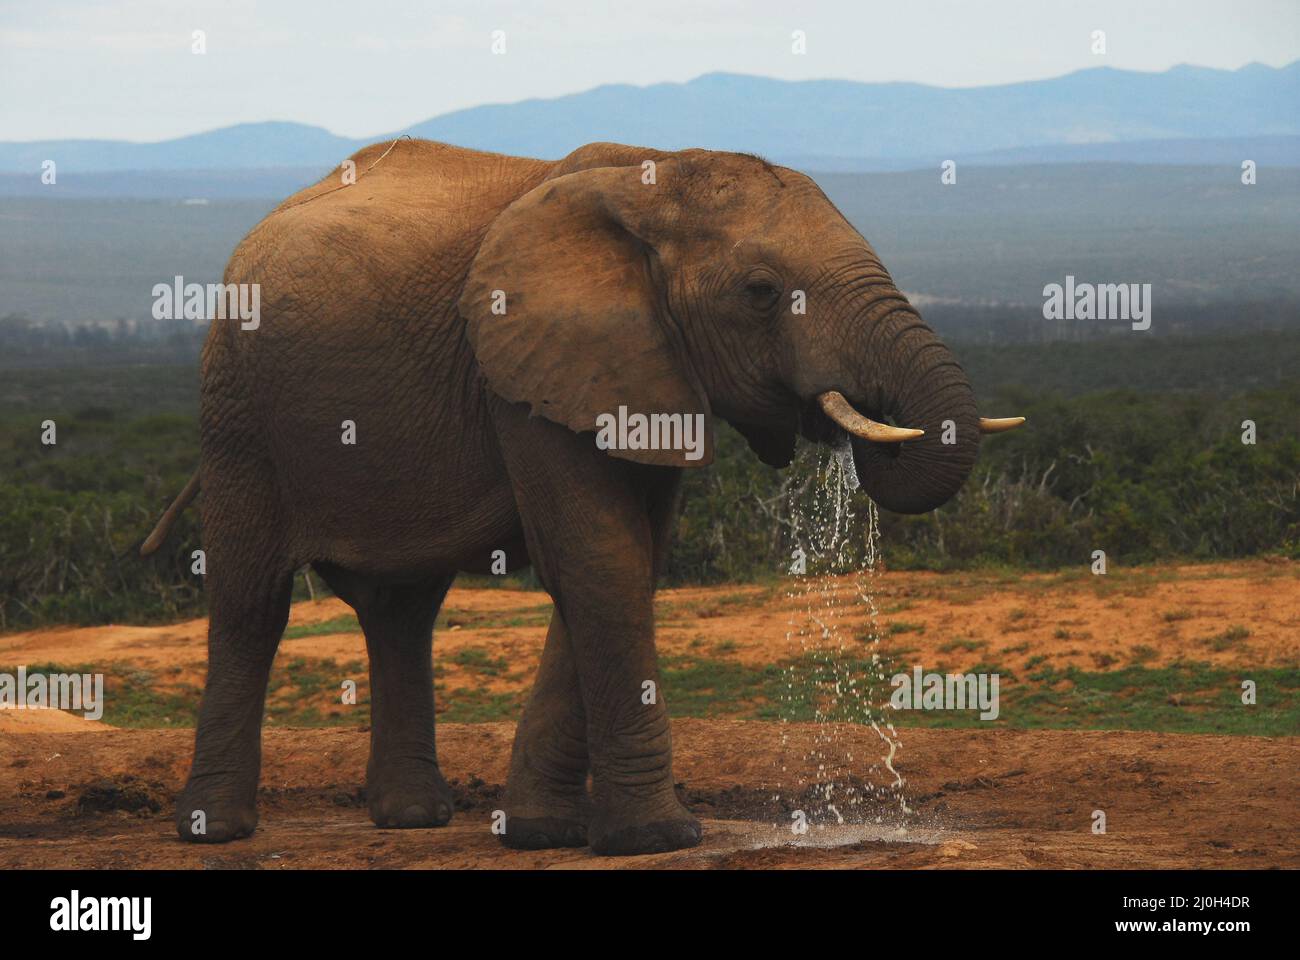 A South African safari close up view of a large adult wild Elephant drinking water, with much of it flowing to the ground.  Note the motion blur. Stock Photo